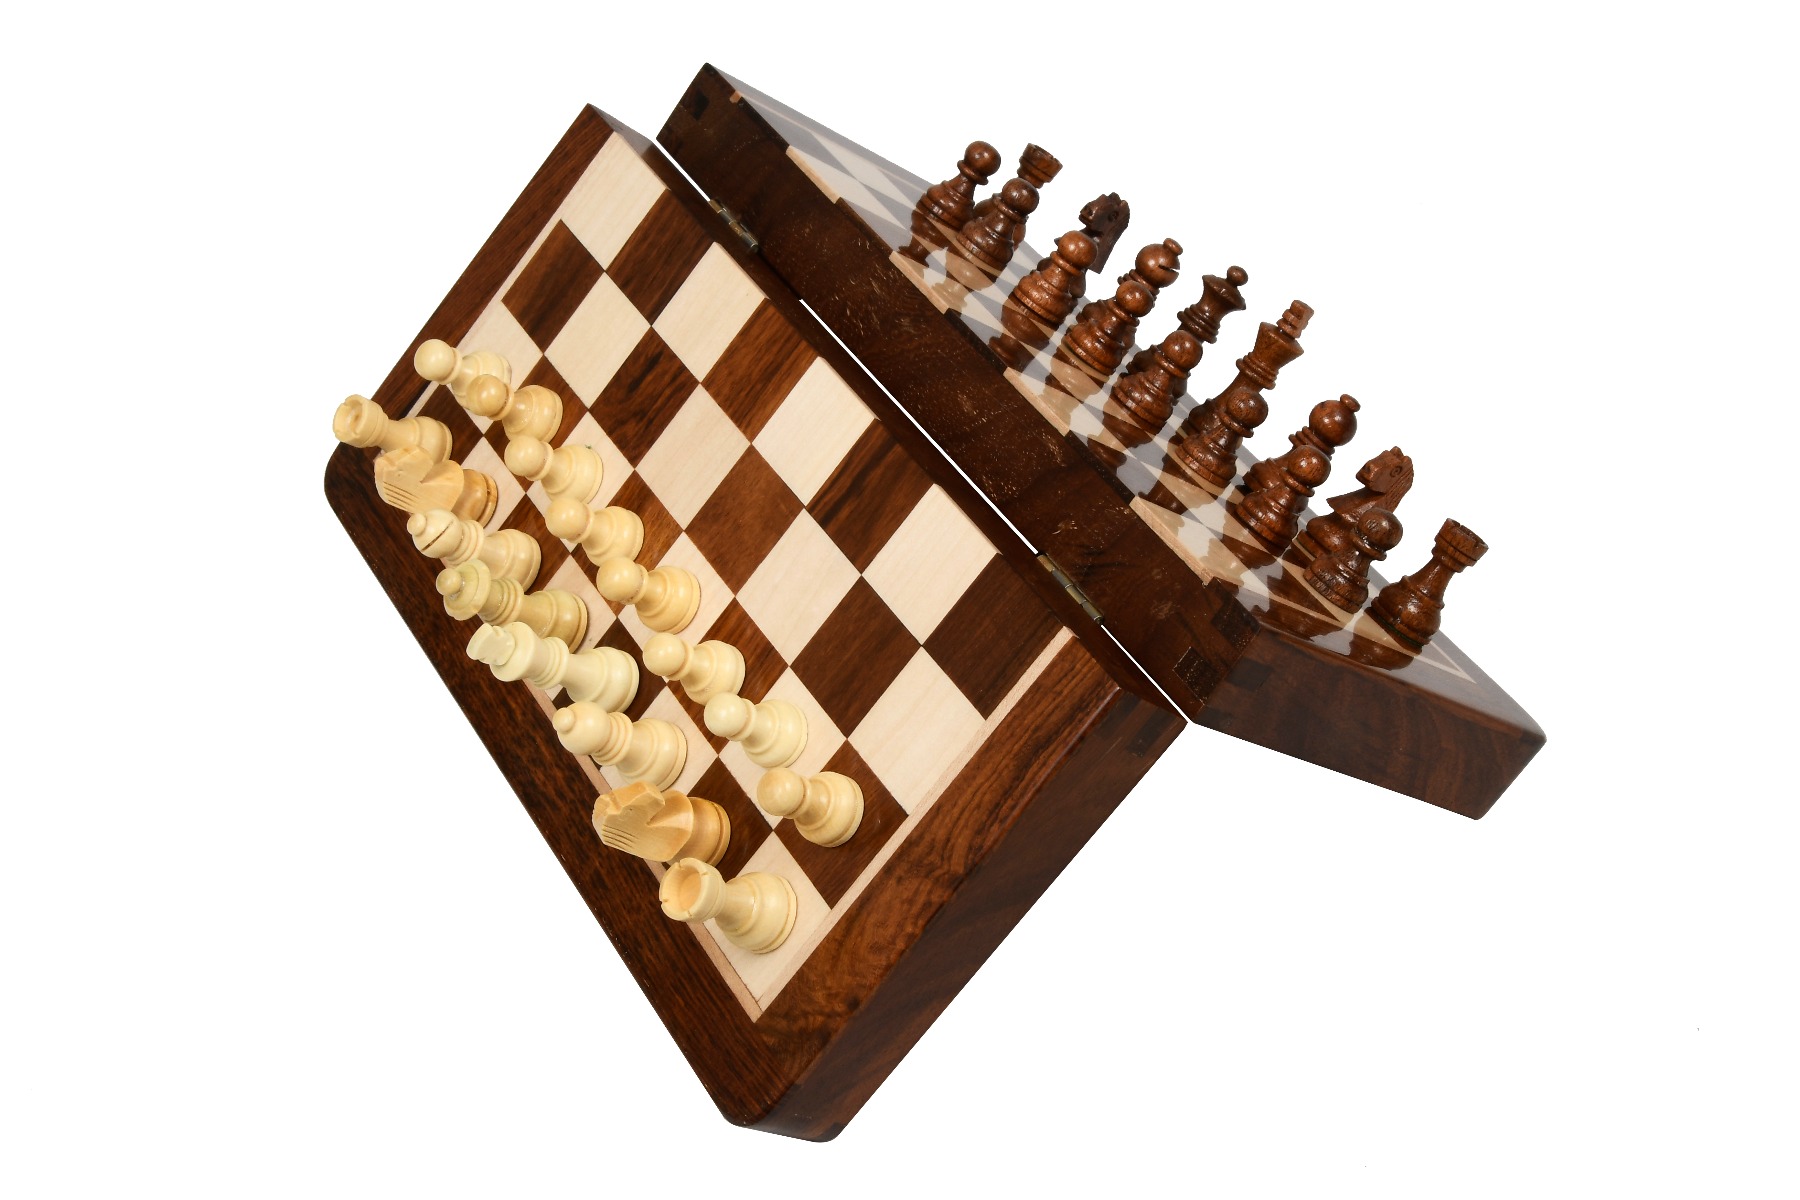 2 Additional Queens Chess for Adults YHYH Chess Folding Magnetic Travel Chess Set，Lightweight for Easy Carrying Gift for Chess Lovers and Learners Color : Wood Color, Size : Large